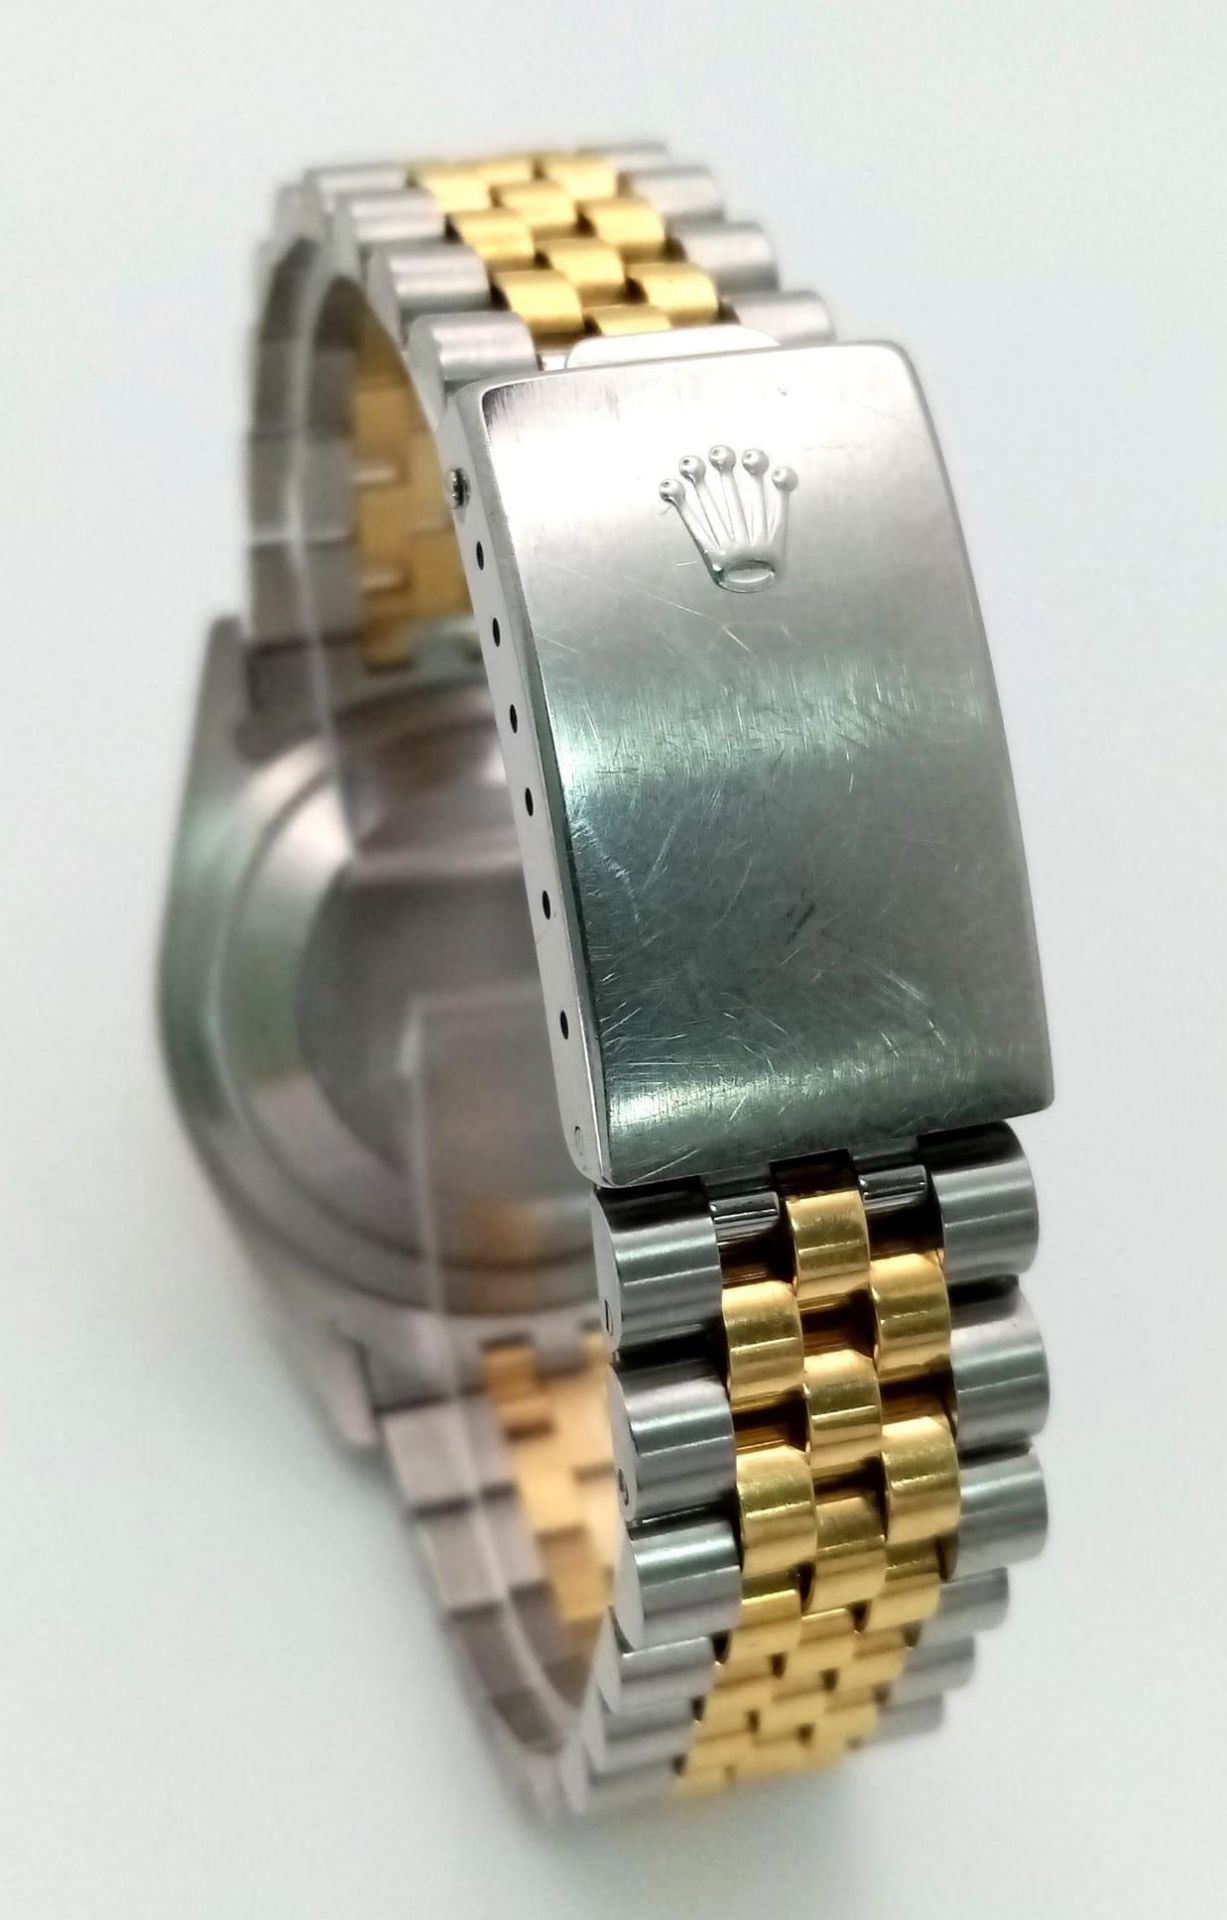 THE CLASSIC ROLEX OYSTER PERPETUAL DATEJUST IN BI-METAL WITH GOLDTONE DIAL . 36mm - Image 5 of 7